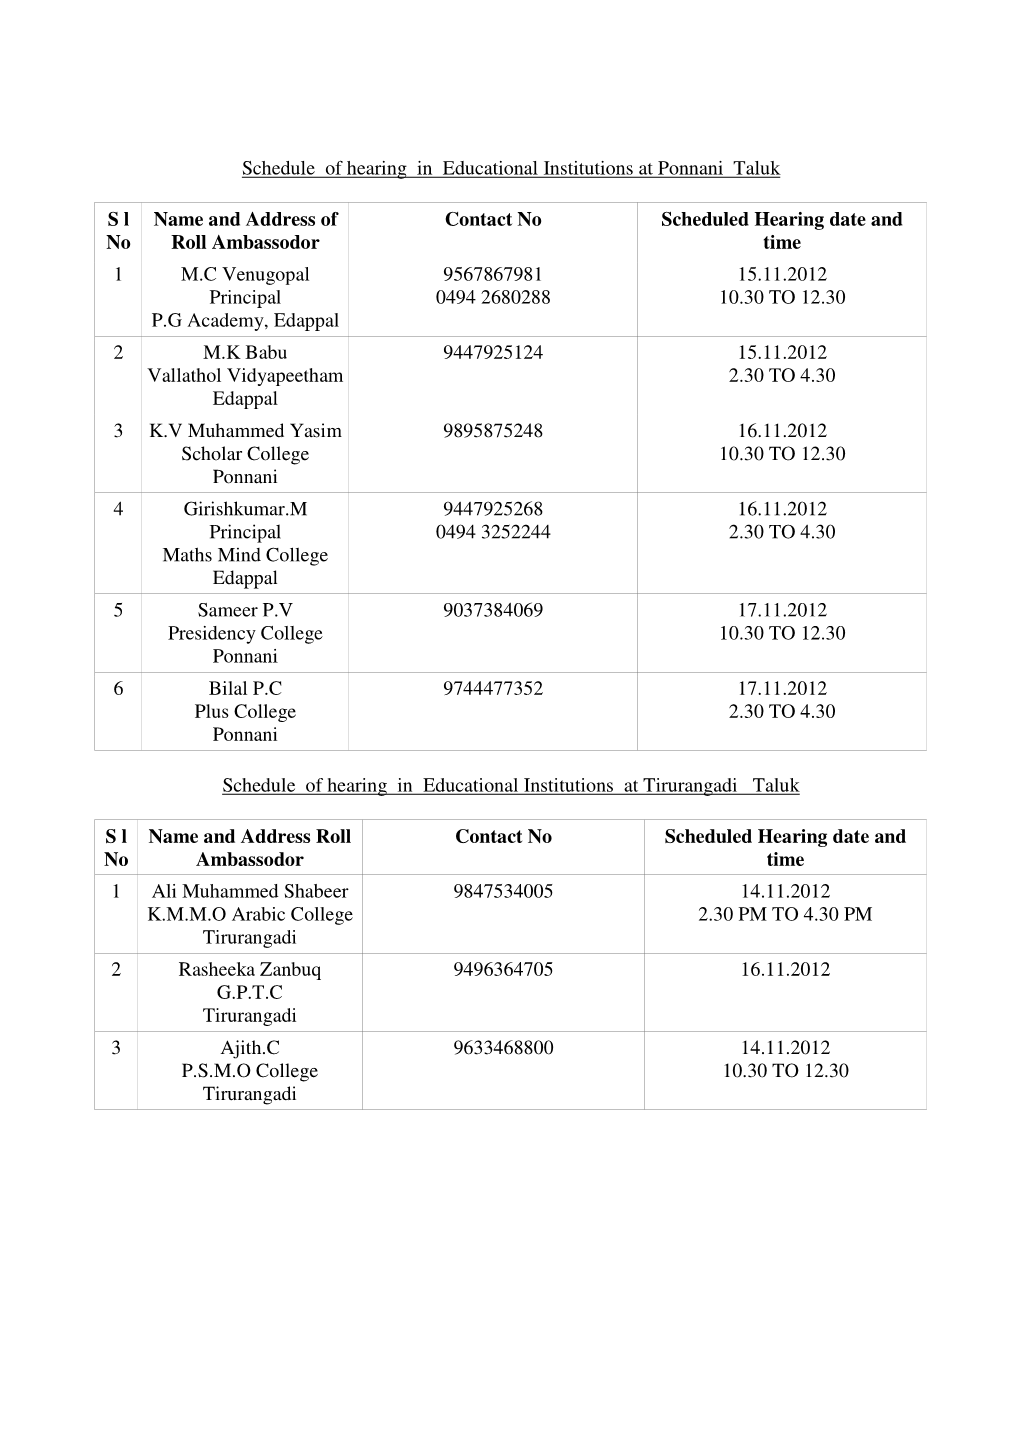 Schedule of Hearing in Educational Institutions at Ponnani Taluk